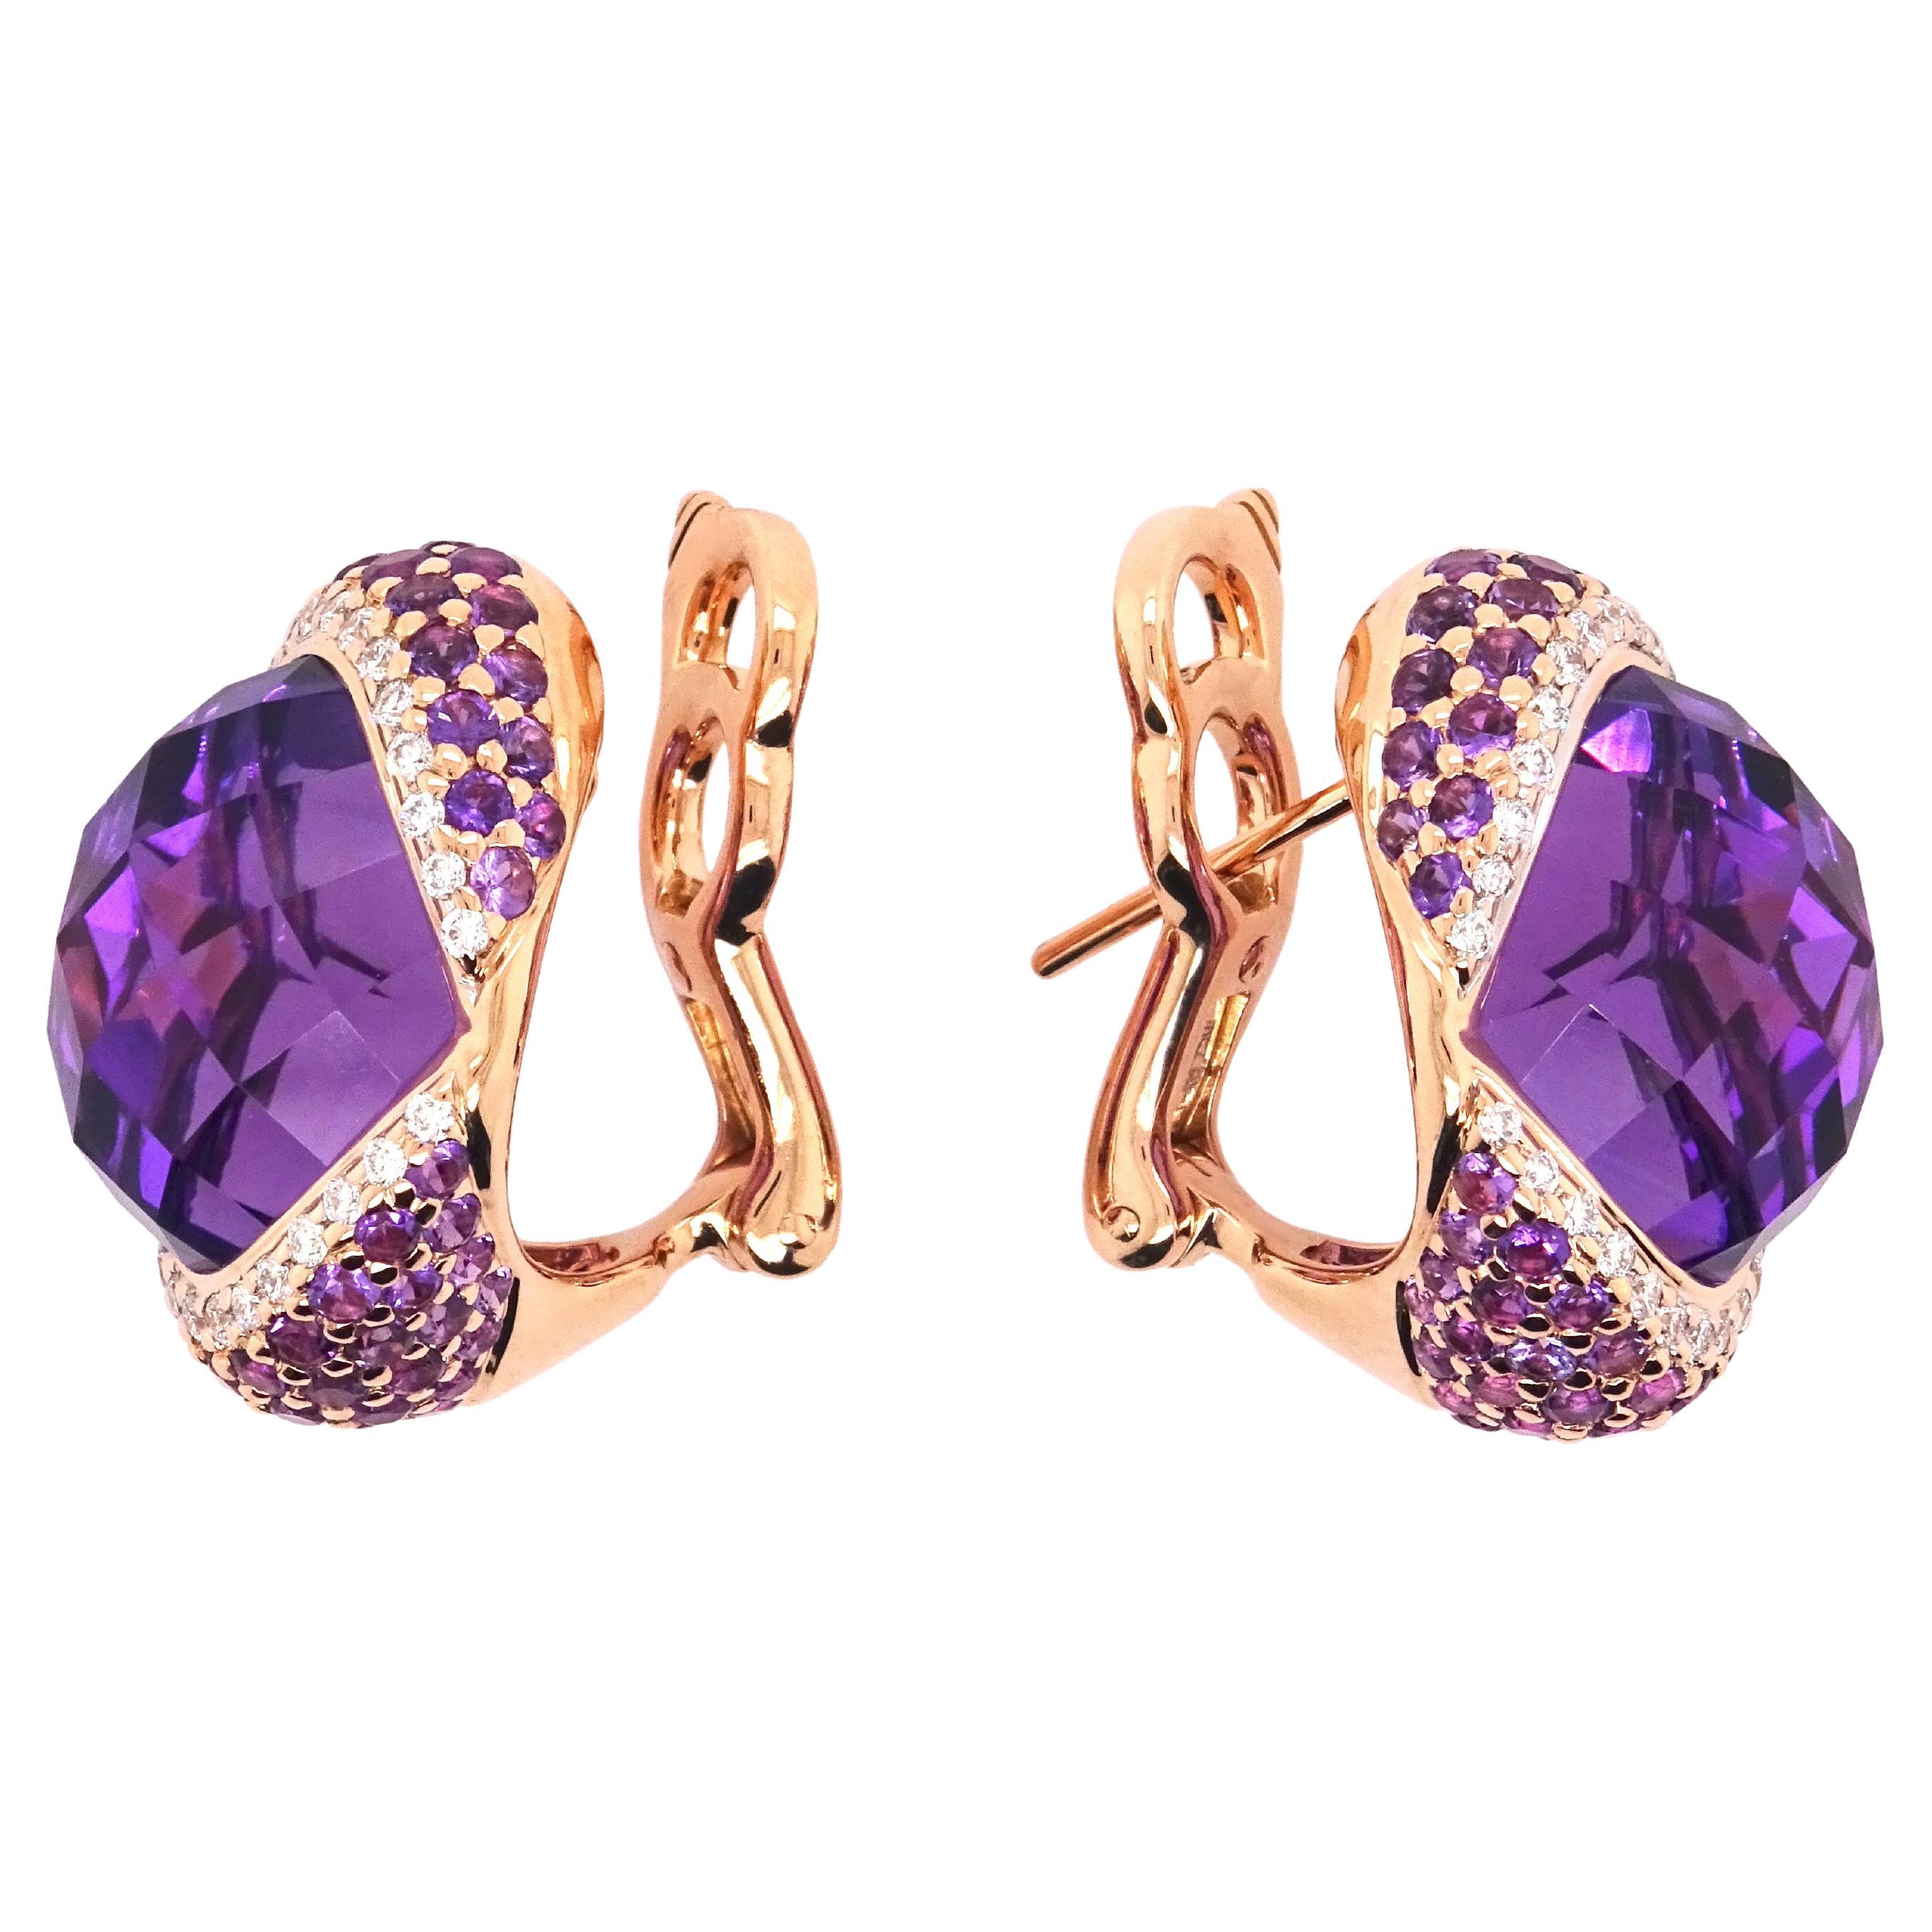 18K Yellow Gold Earrings with White Diamonds and Amethysts